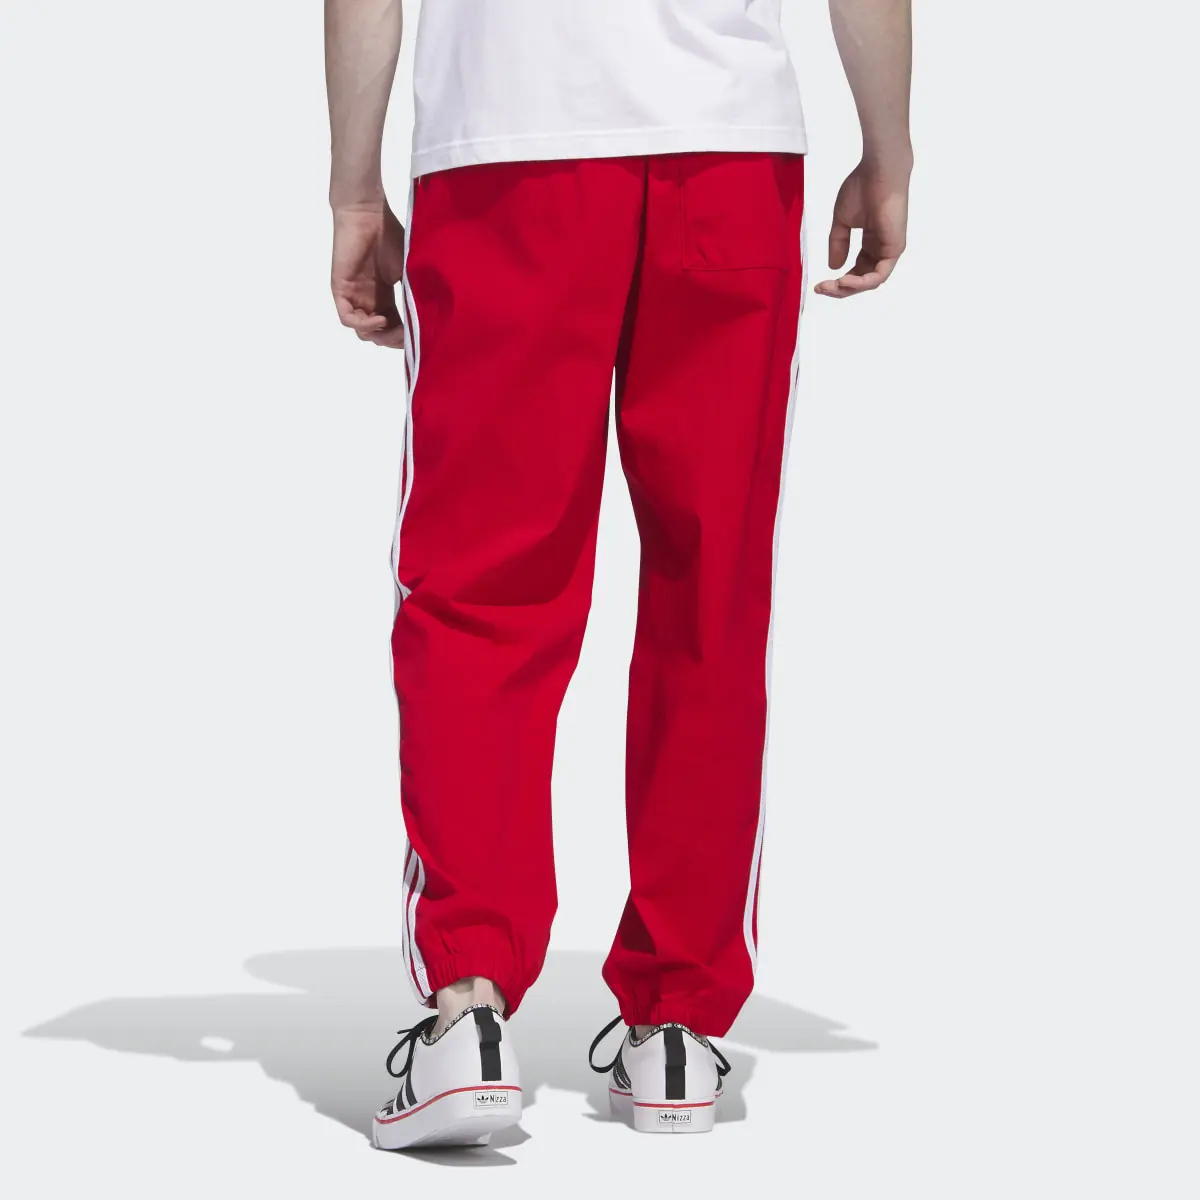 Adidas Woven Tracksuit Bottoms. 2